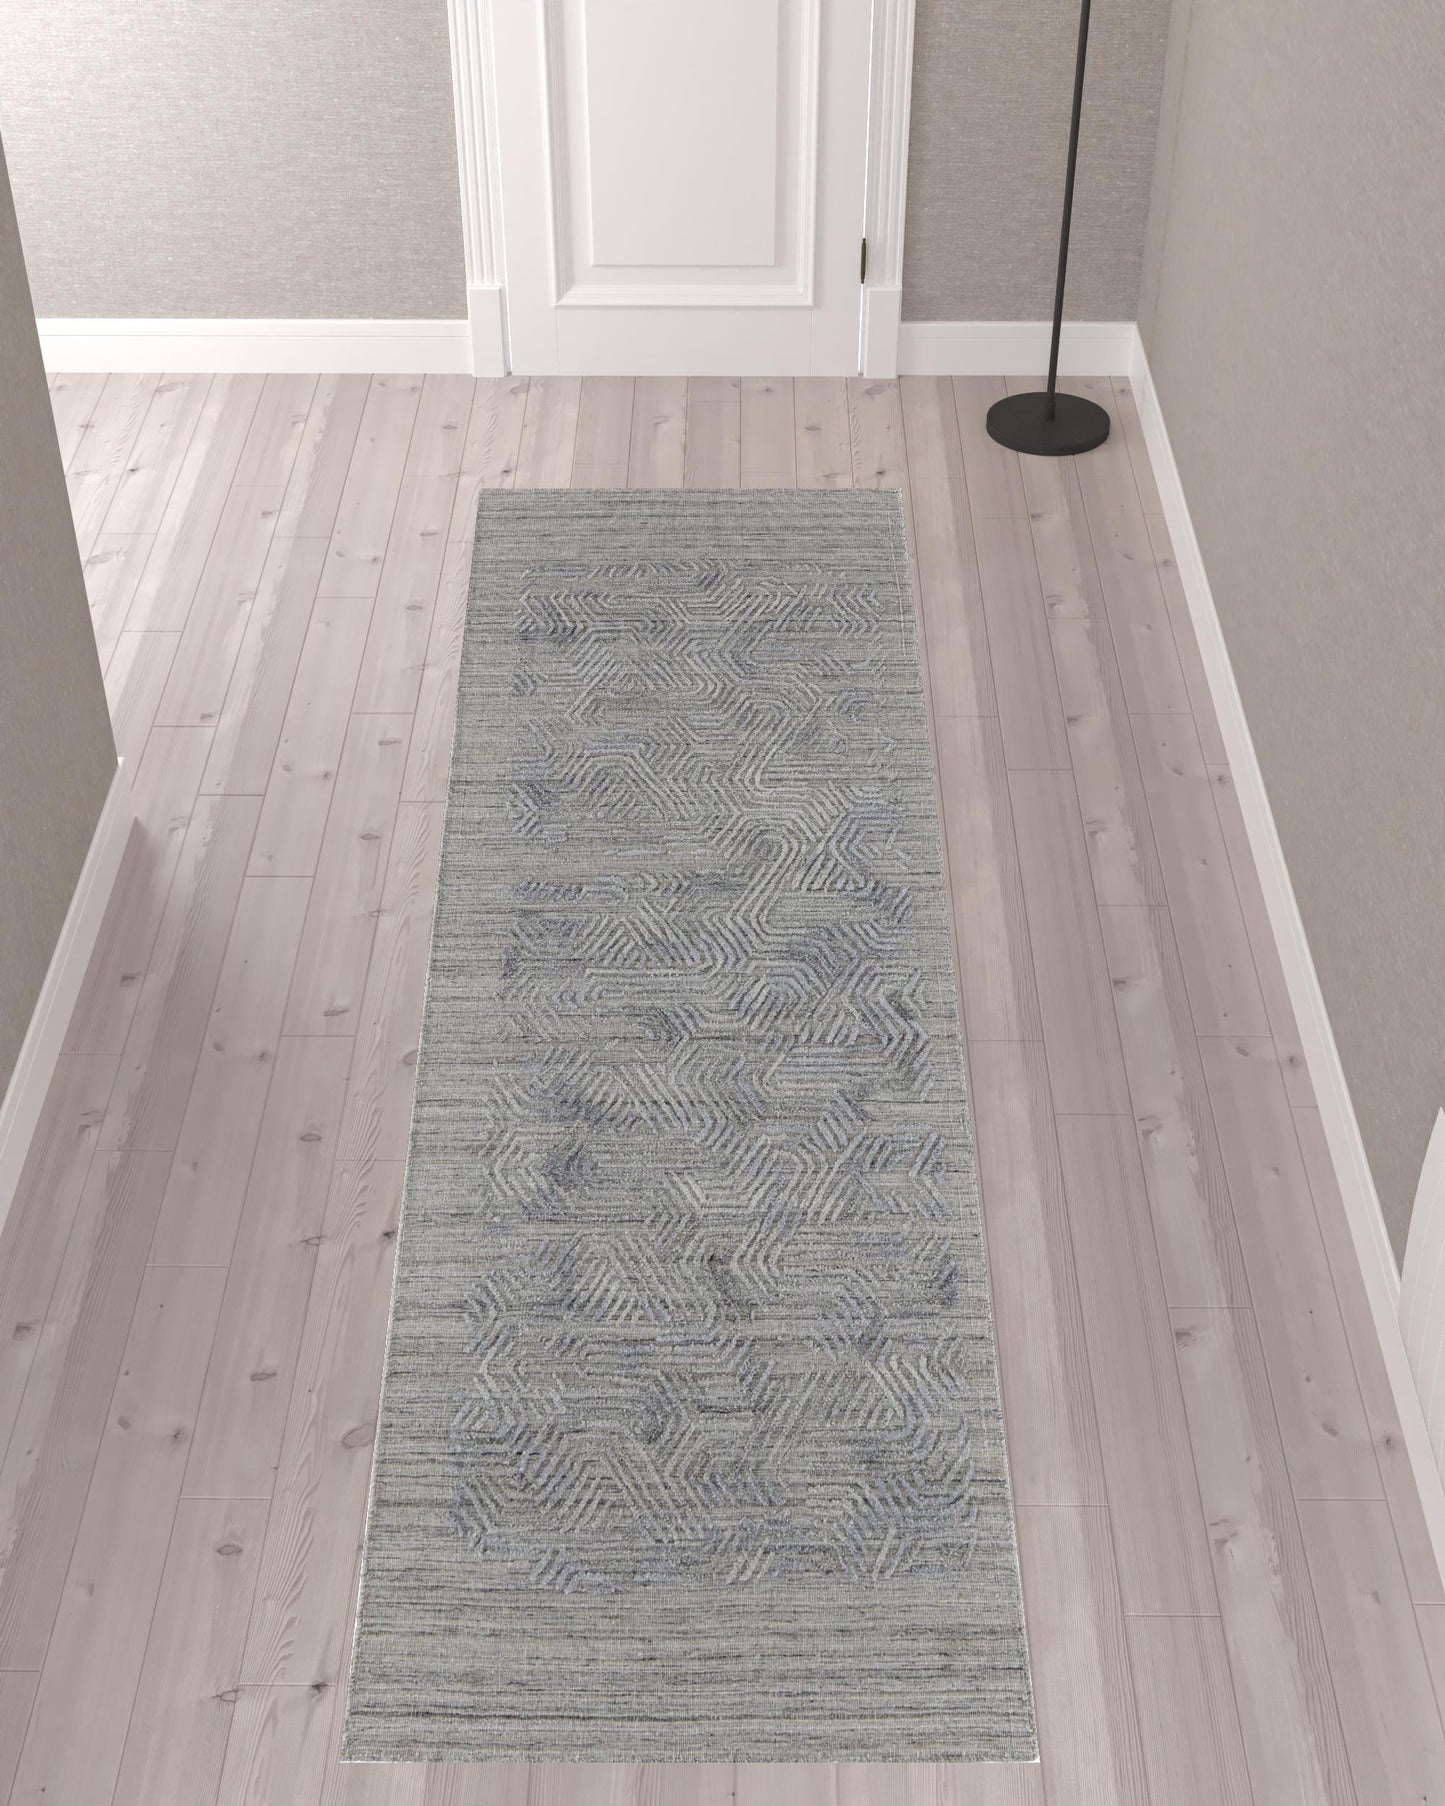 5' X 8' Gray And Blue Abstract Hand Woven Area Rug